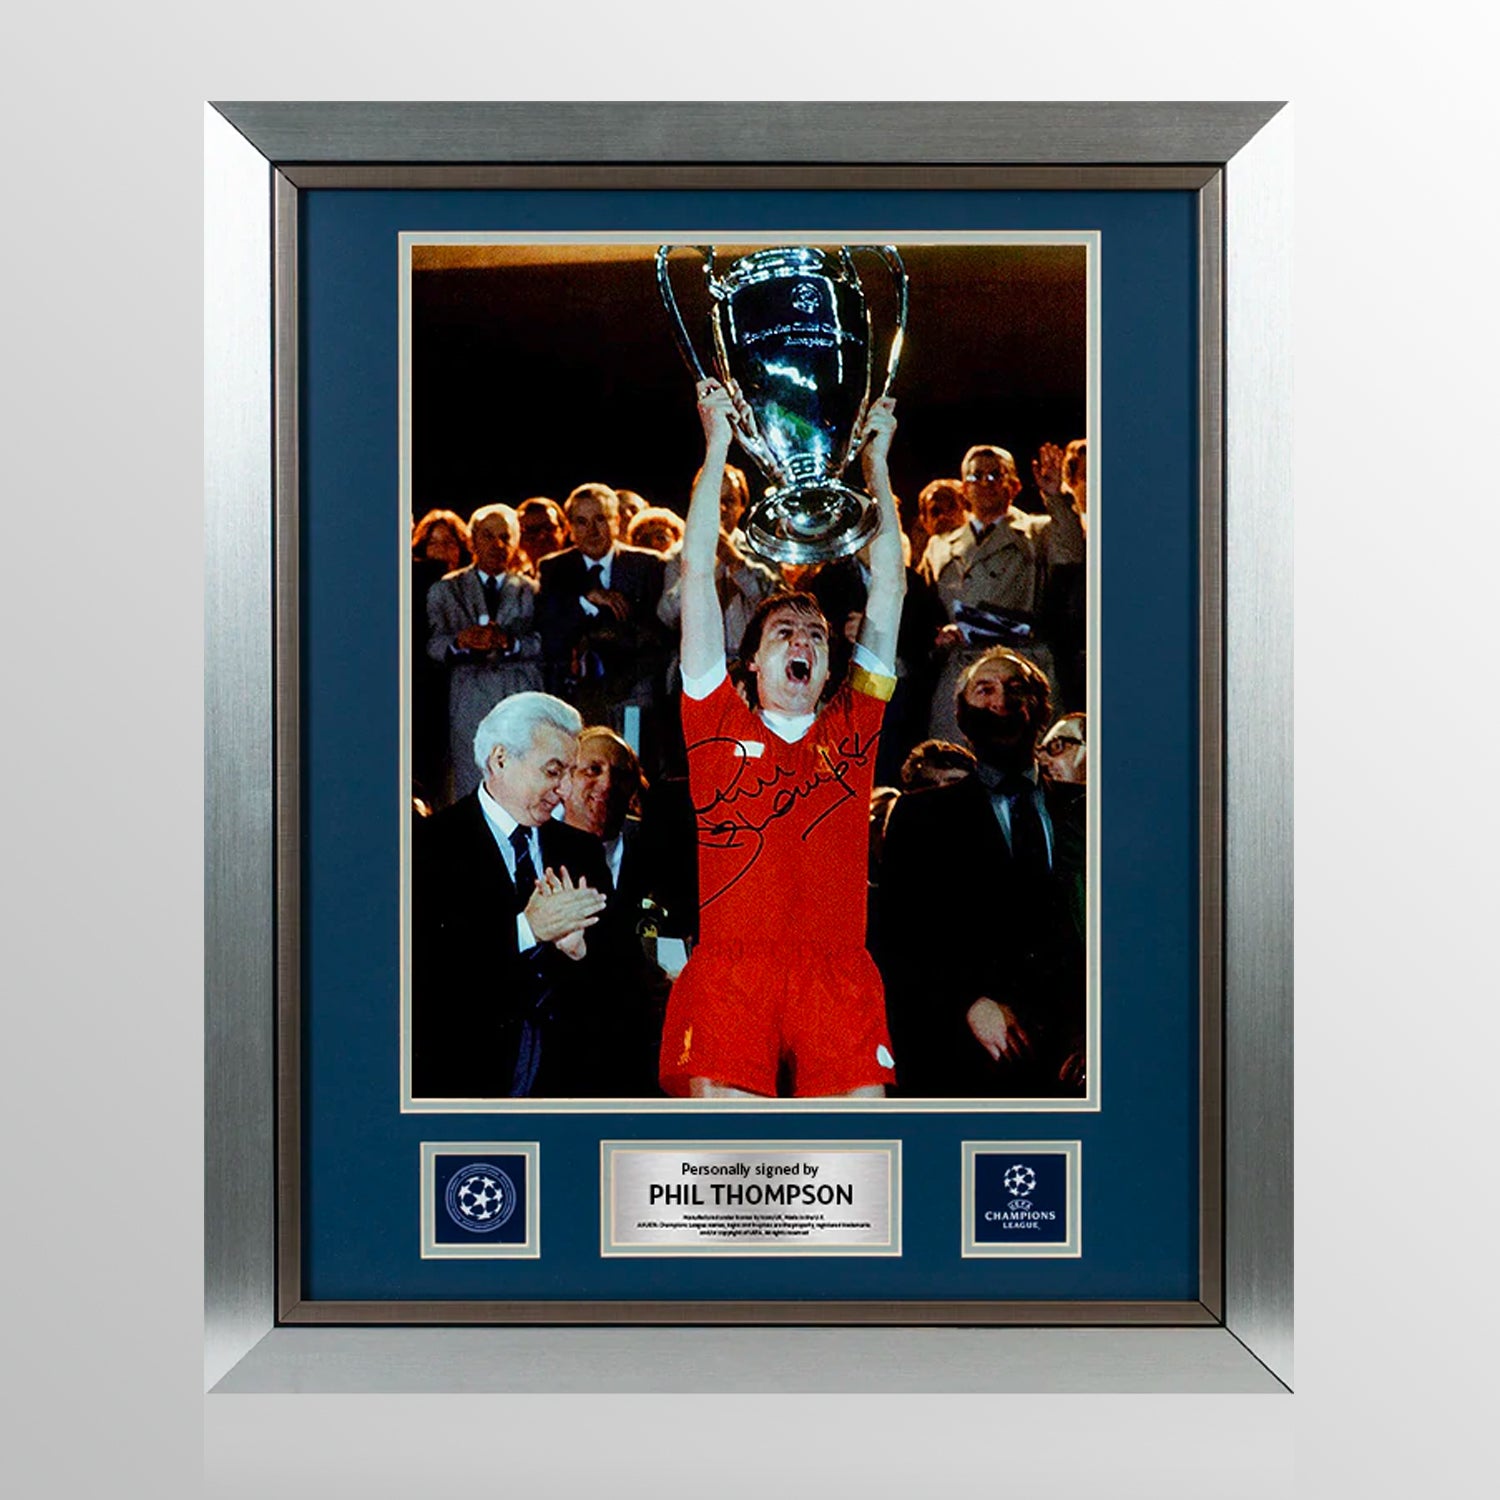 Phil Thompson Official UEFA Champions League Signed and Framed Liverpool Photo: 1981 Winners UEFA Club Competitions Online Store